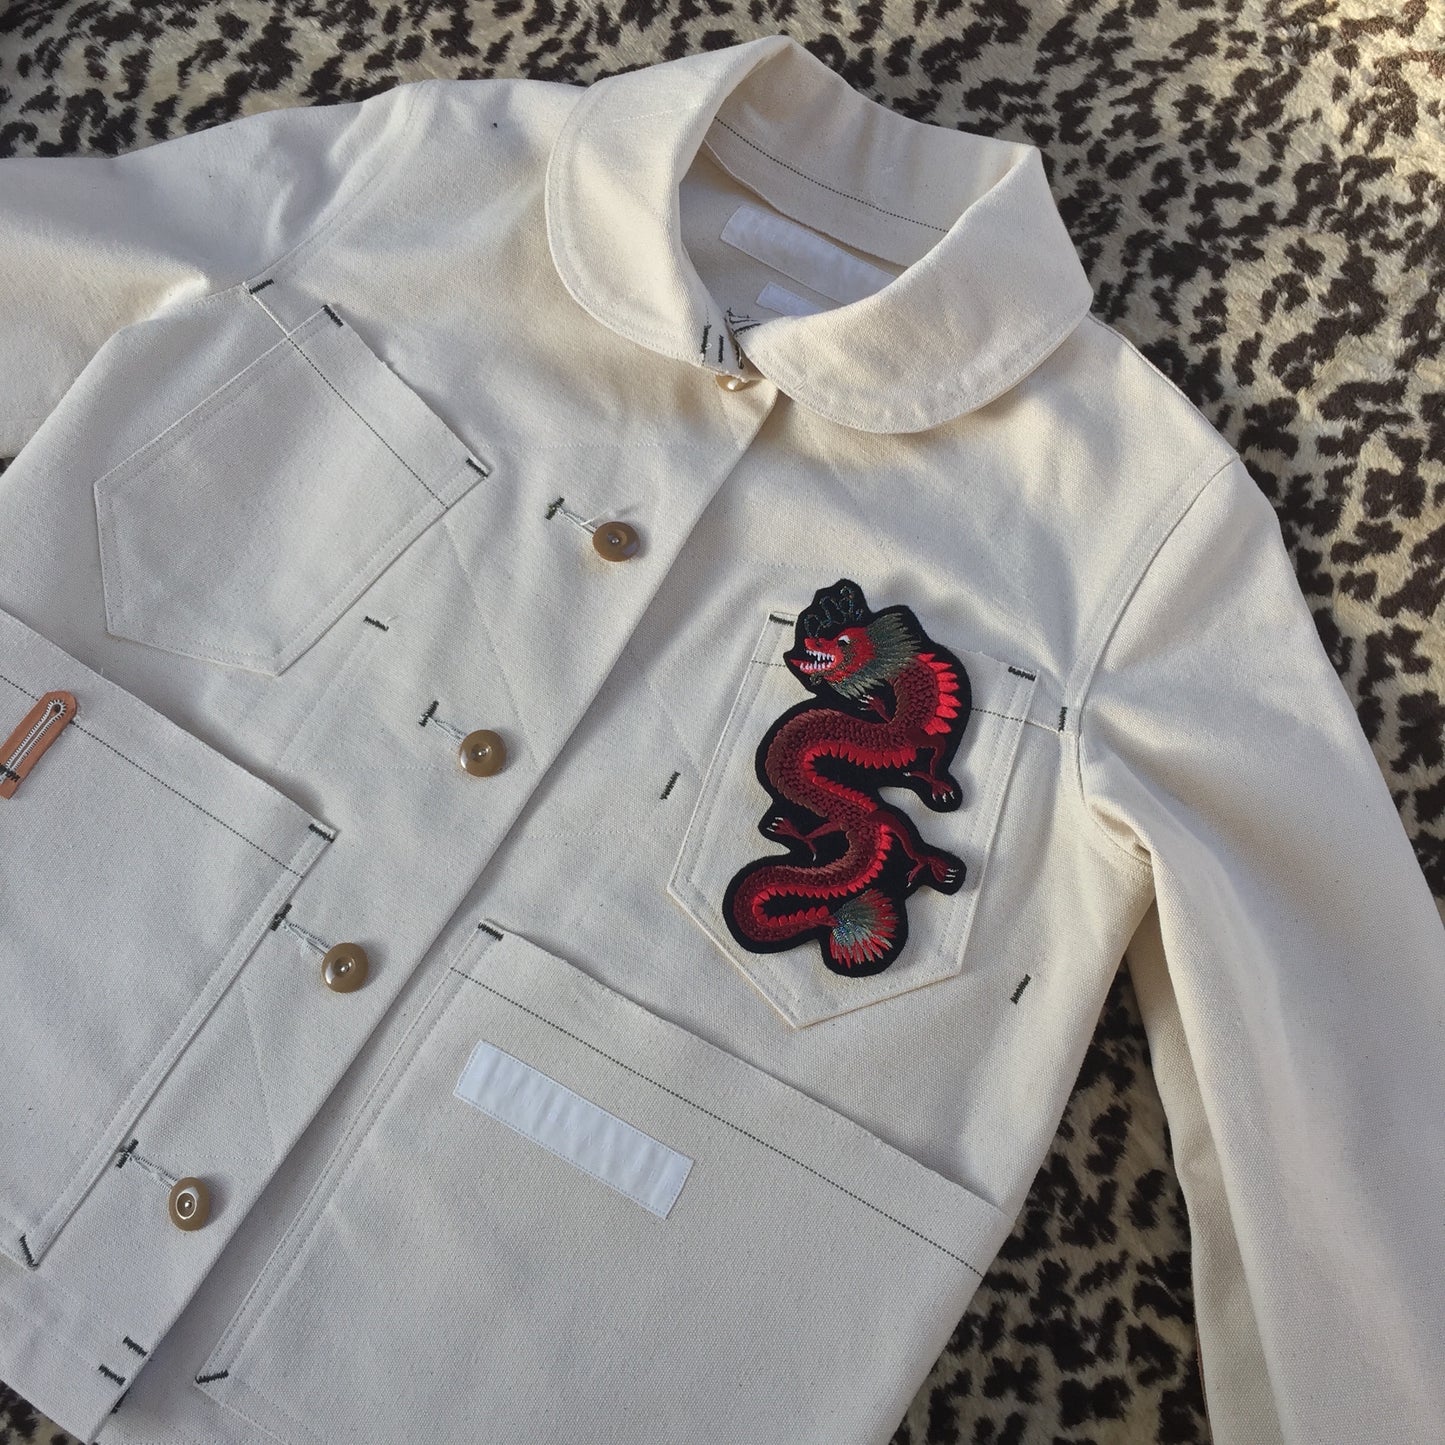 Dragon embroidered patch shown on front pocket of white denim jacket